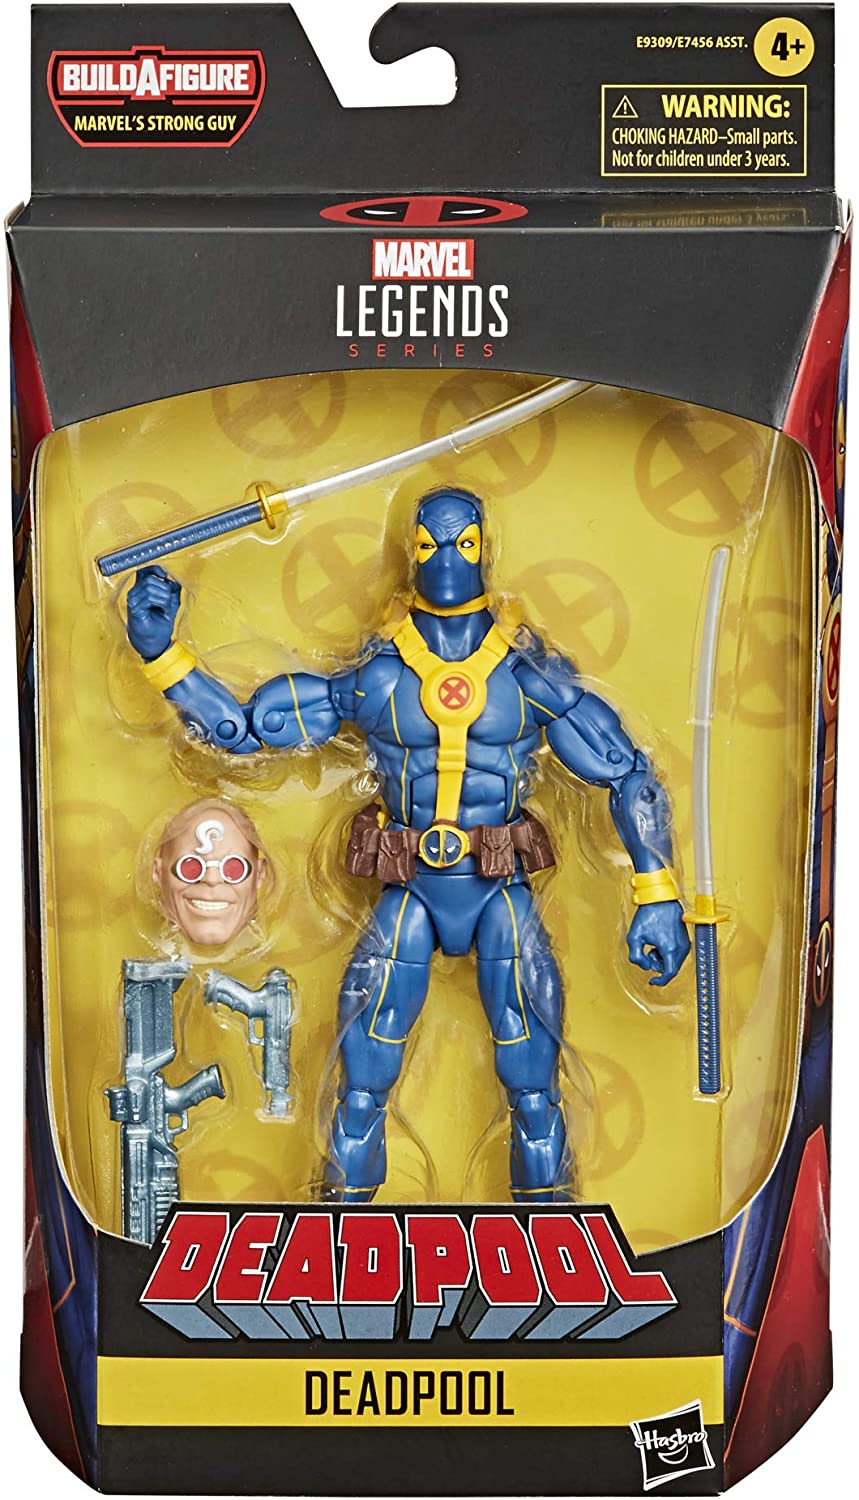 Hasbro Marvel Legends Series Deadpool Collection 6-inch Blue Deadpool Action Figure Toy Premium Design and 1 Accessory